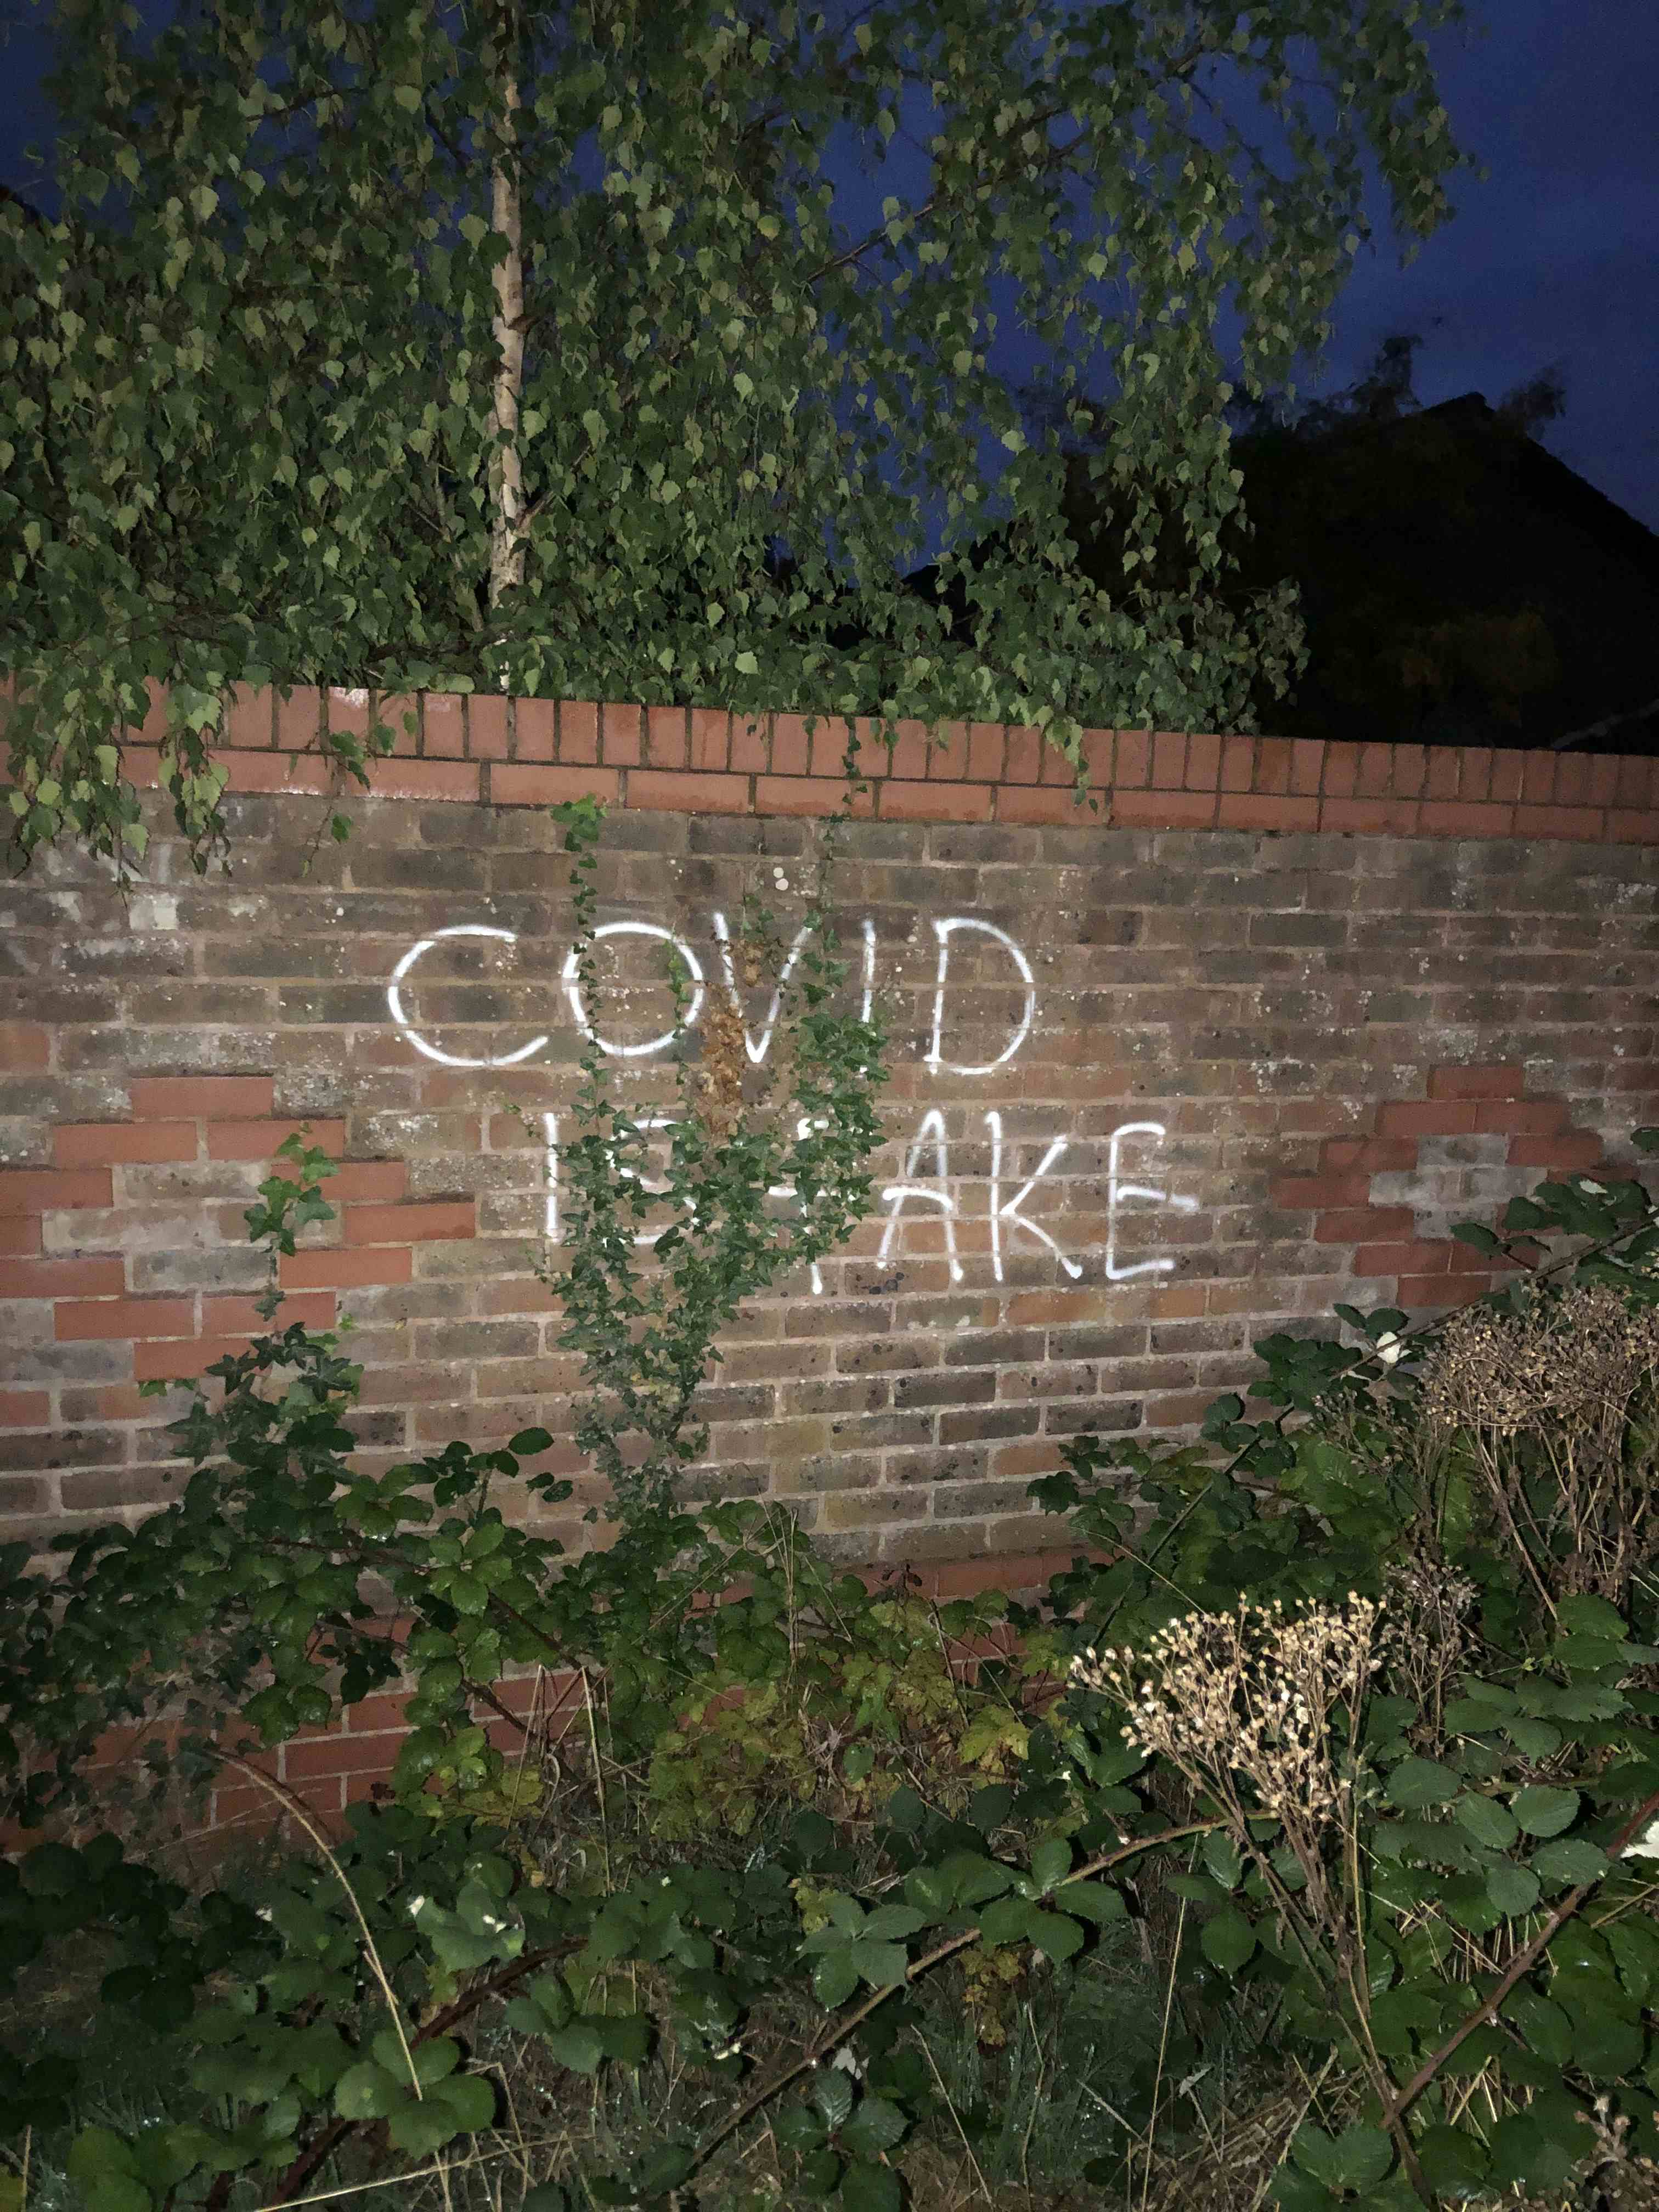 Covid is Fake